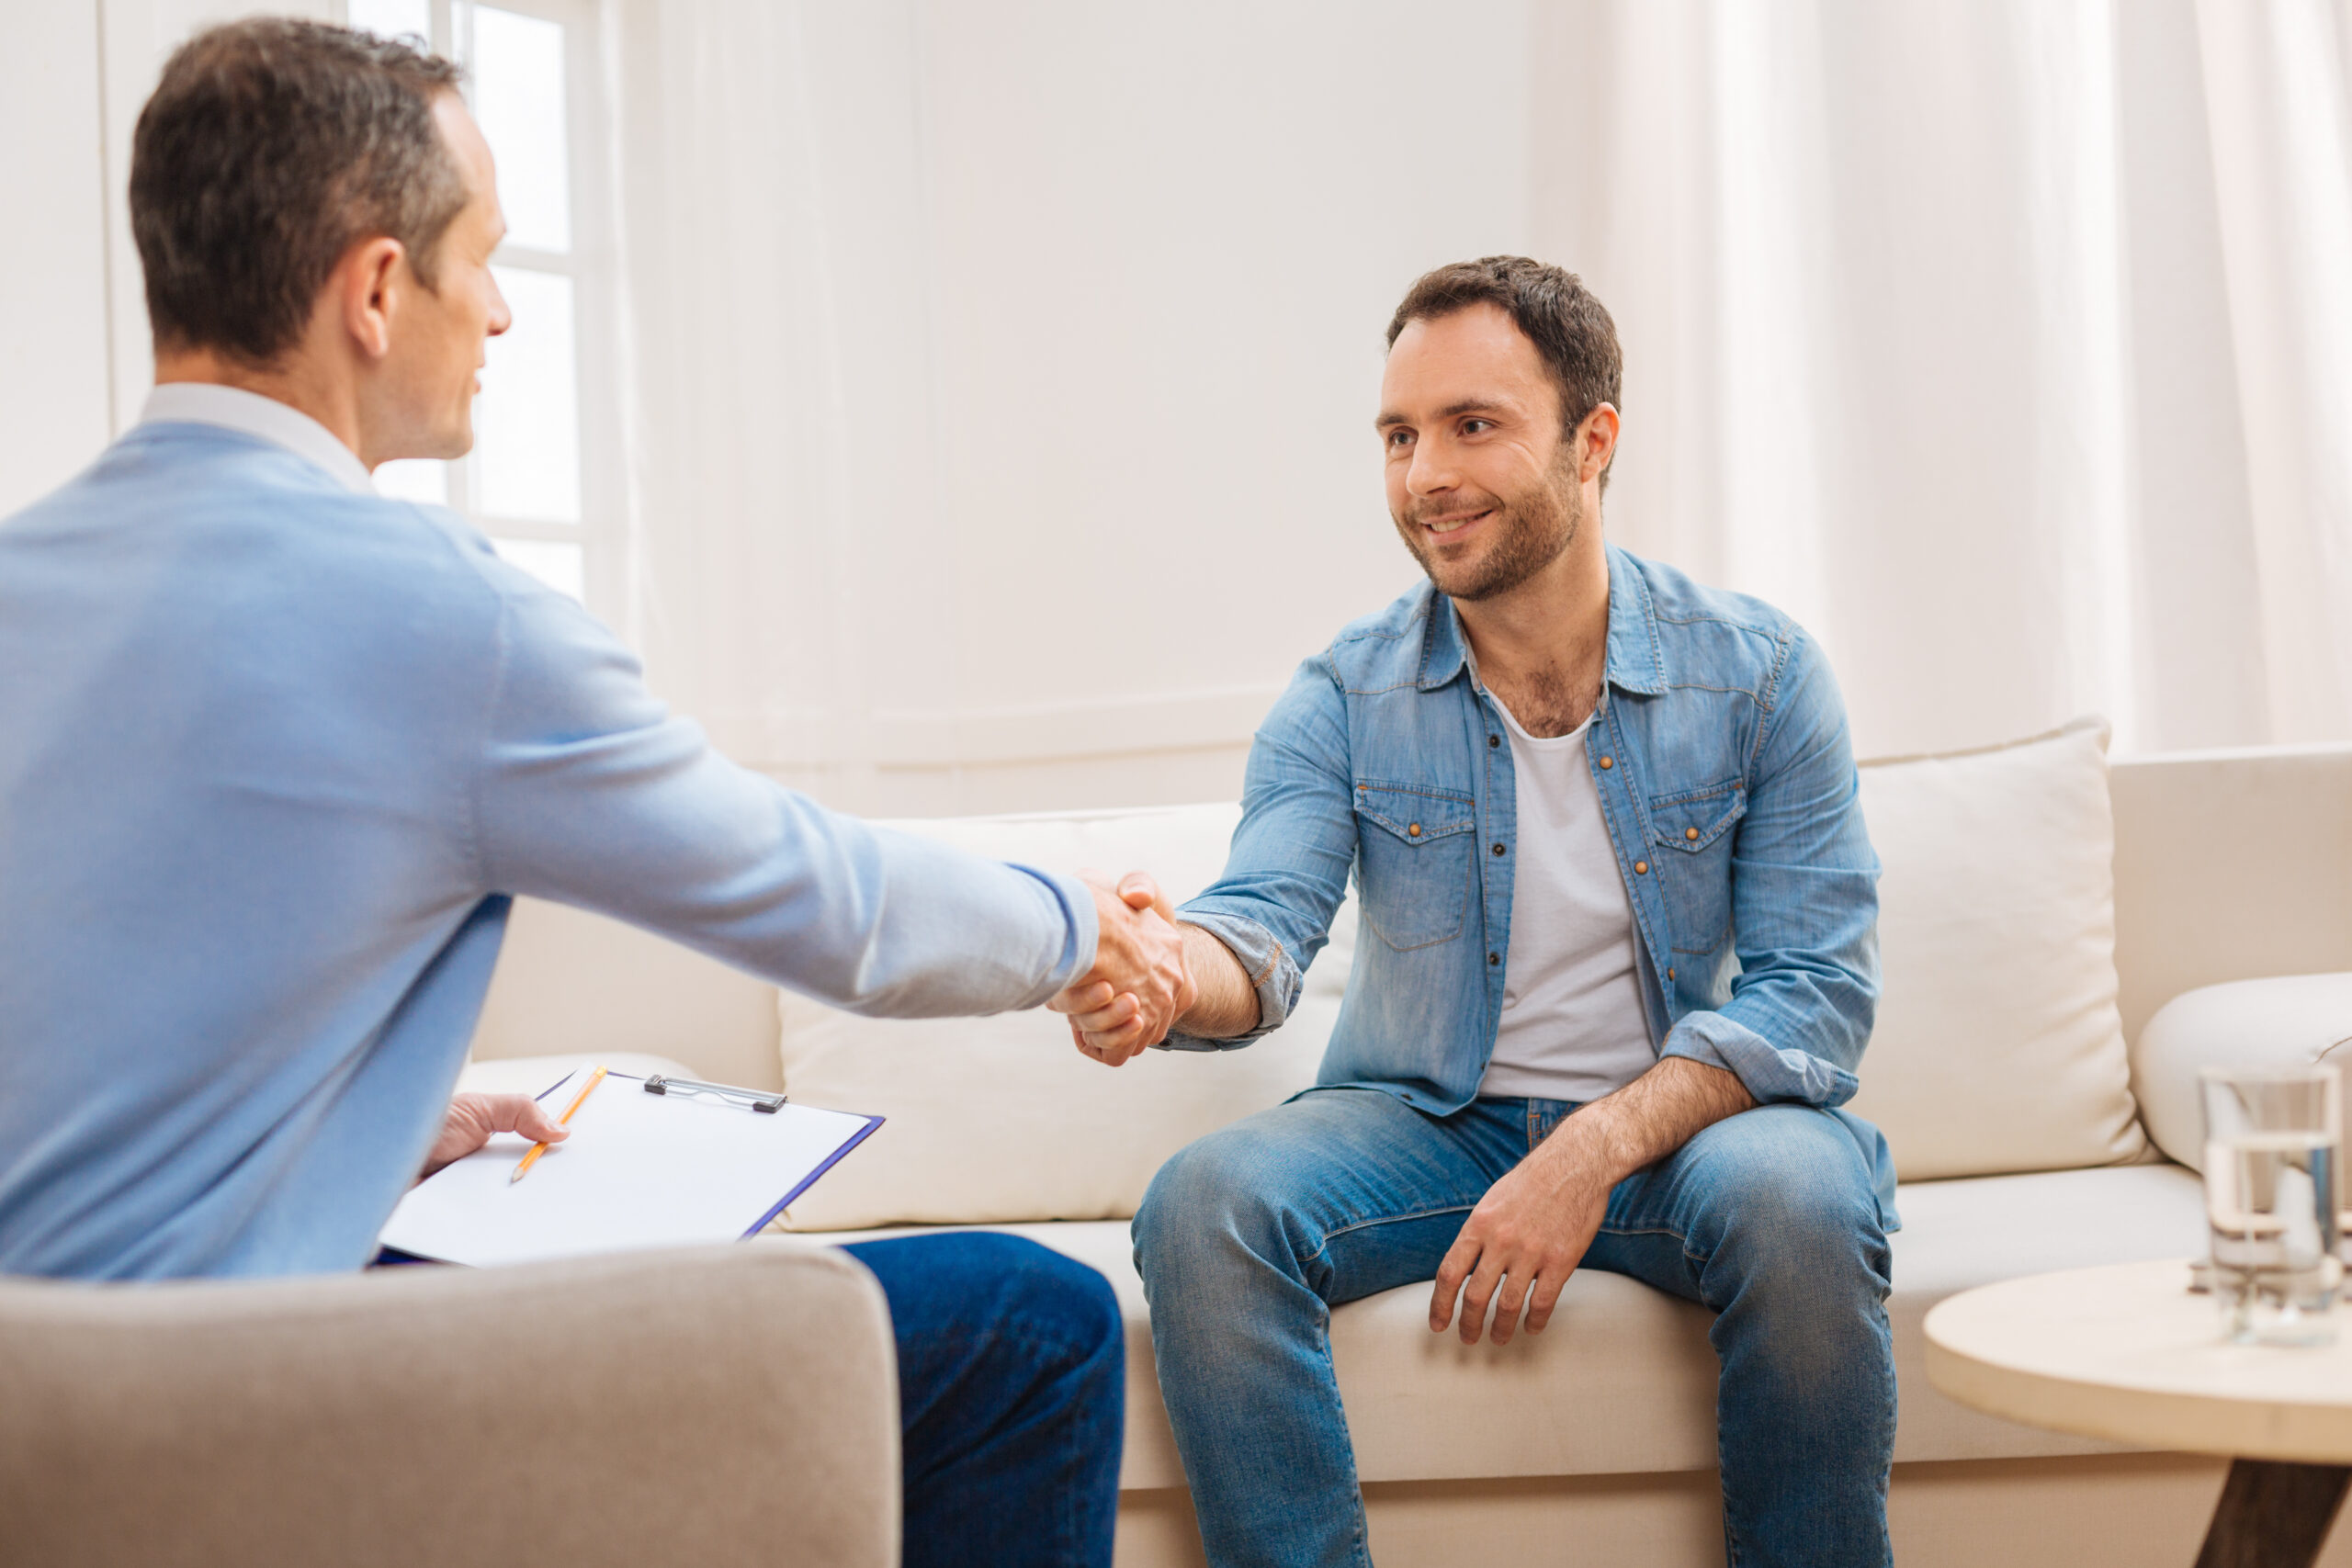 Male shaking hands with male therapist after a successful session